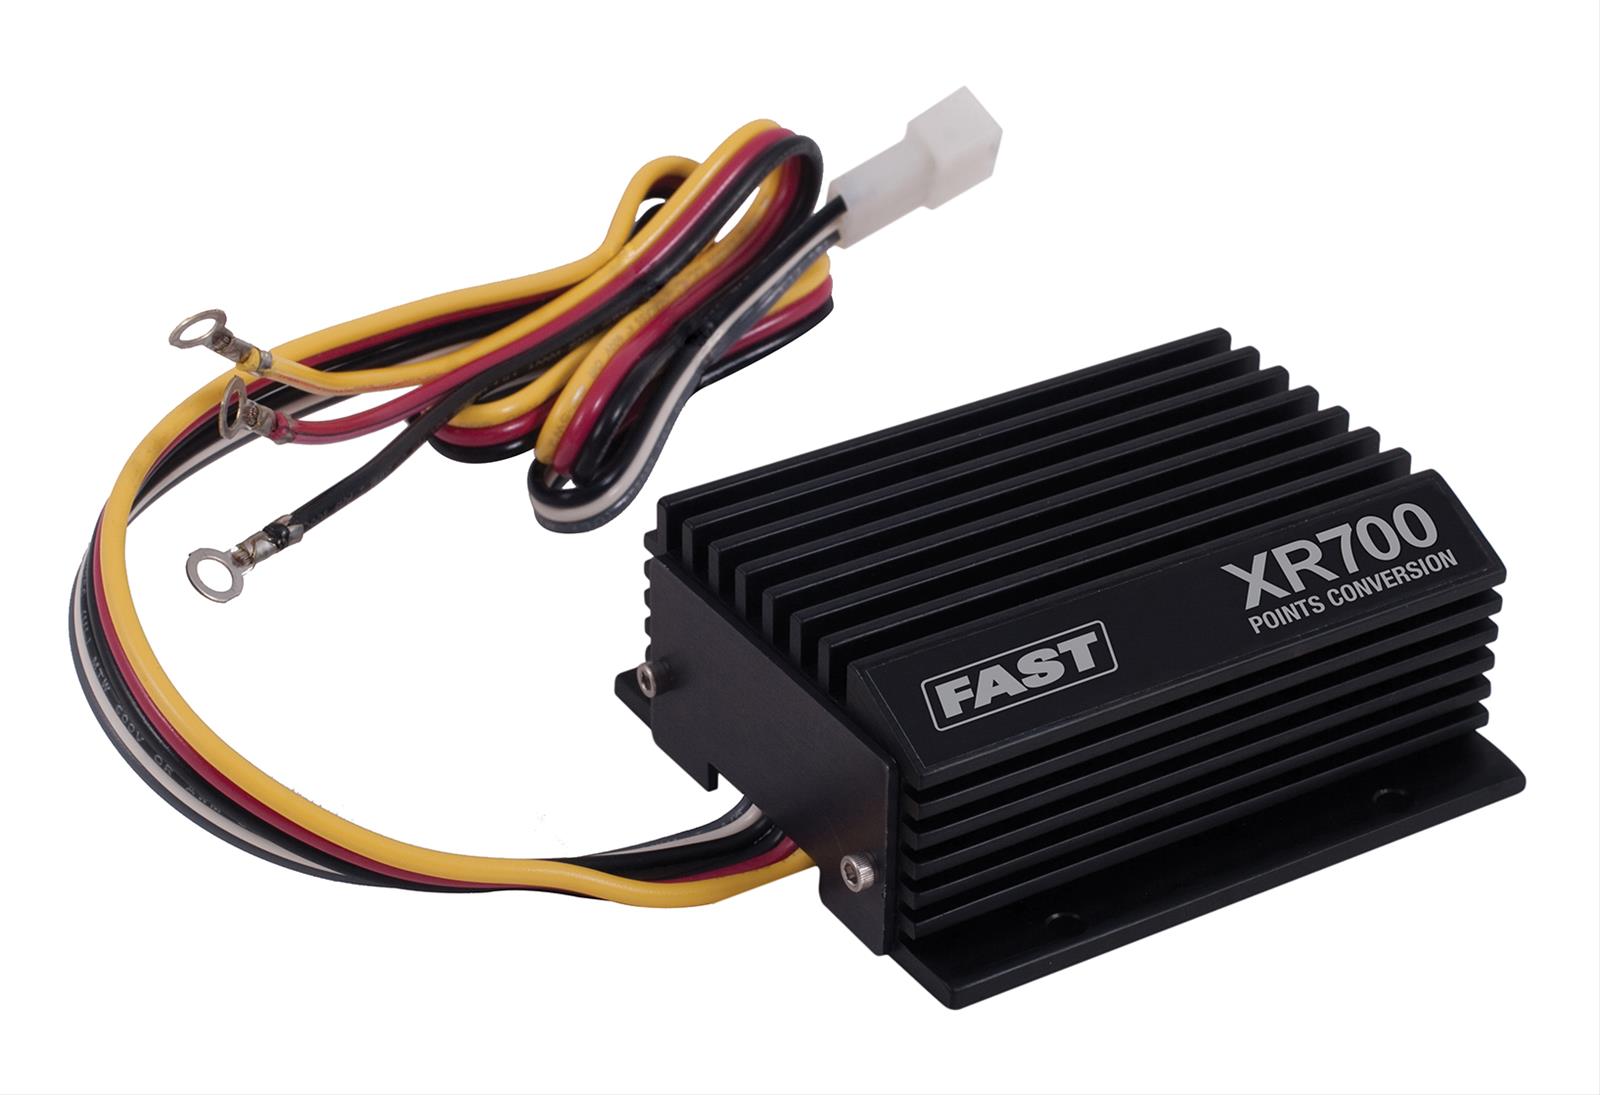 FAST XR700 Points-To-Electronic Ignition Conversion Kit For Domestic 4, 6 And 8 Cylinder Applications Pre 1975